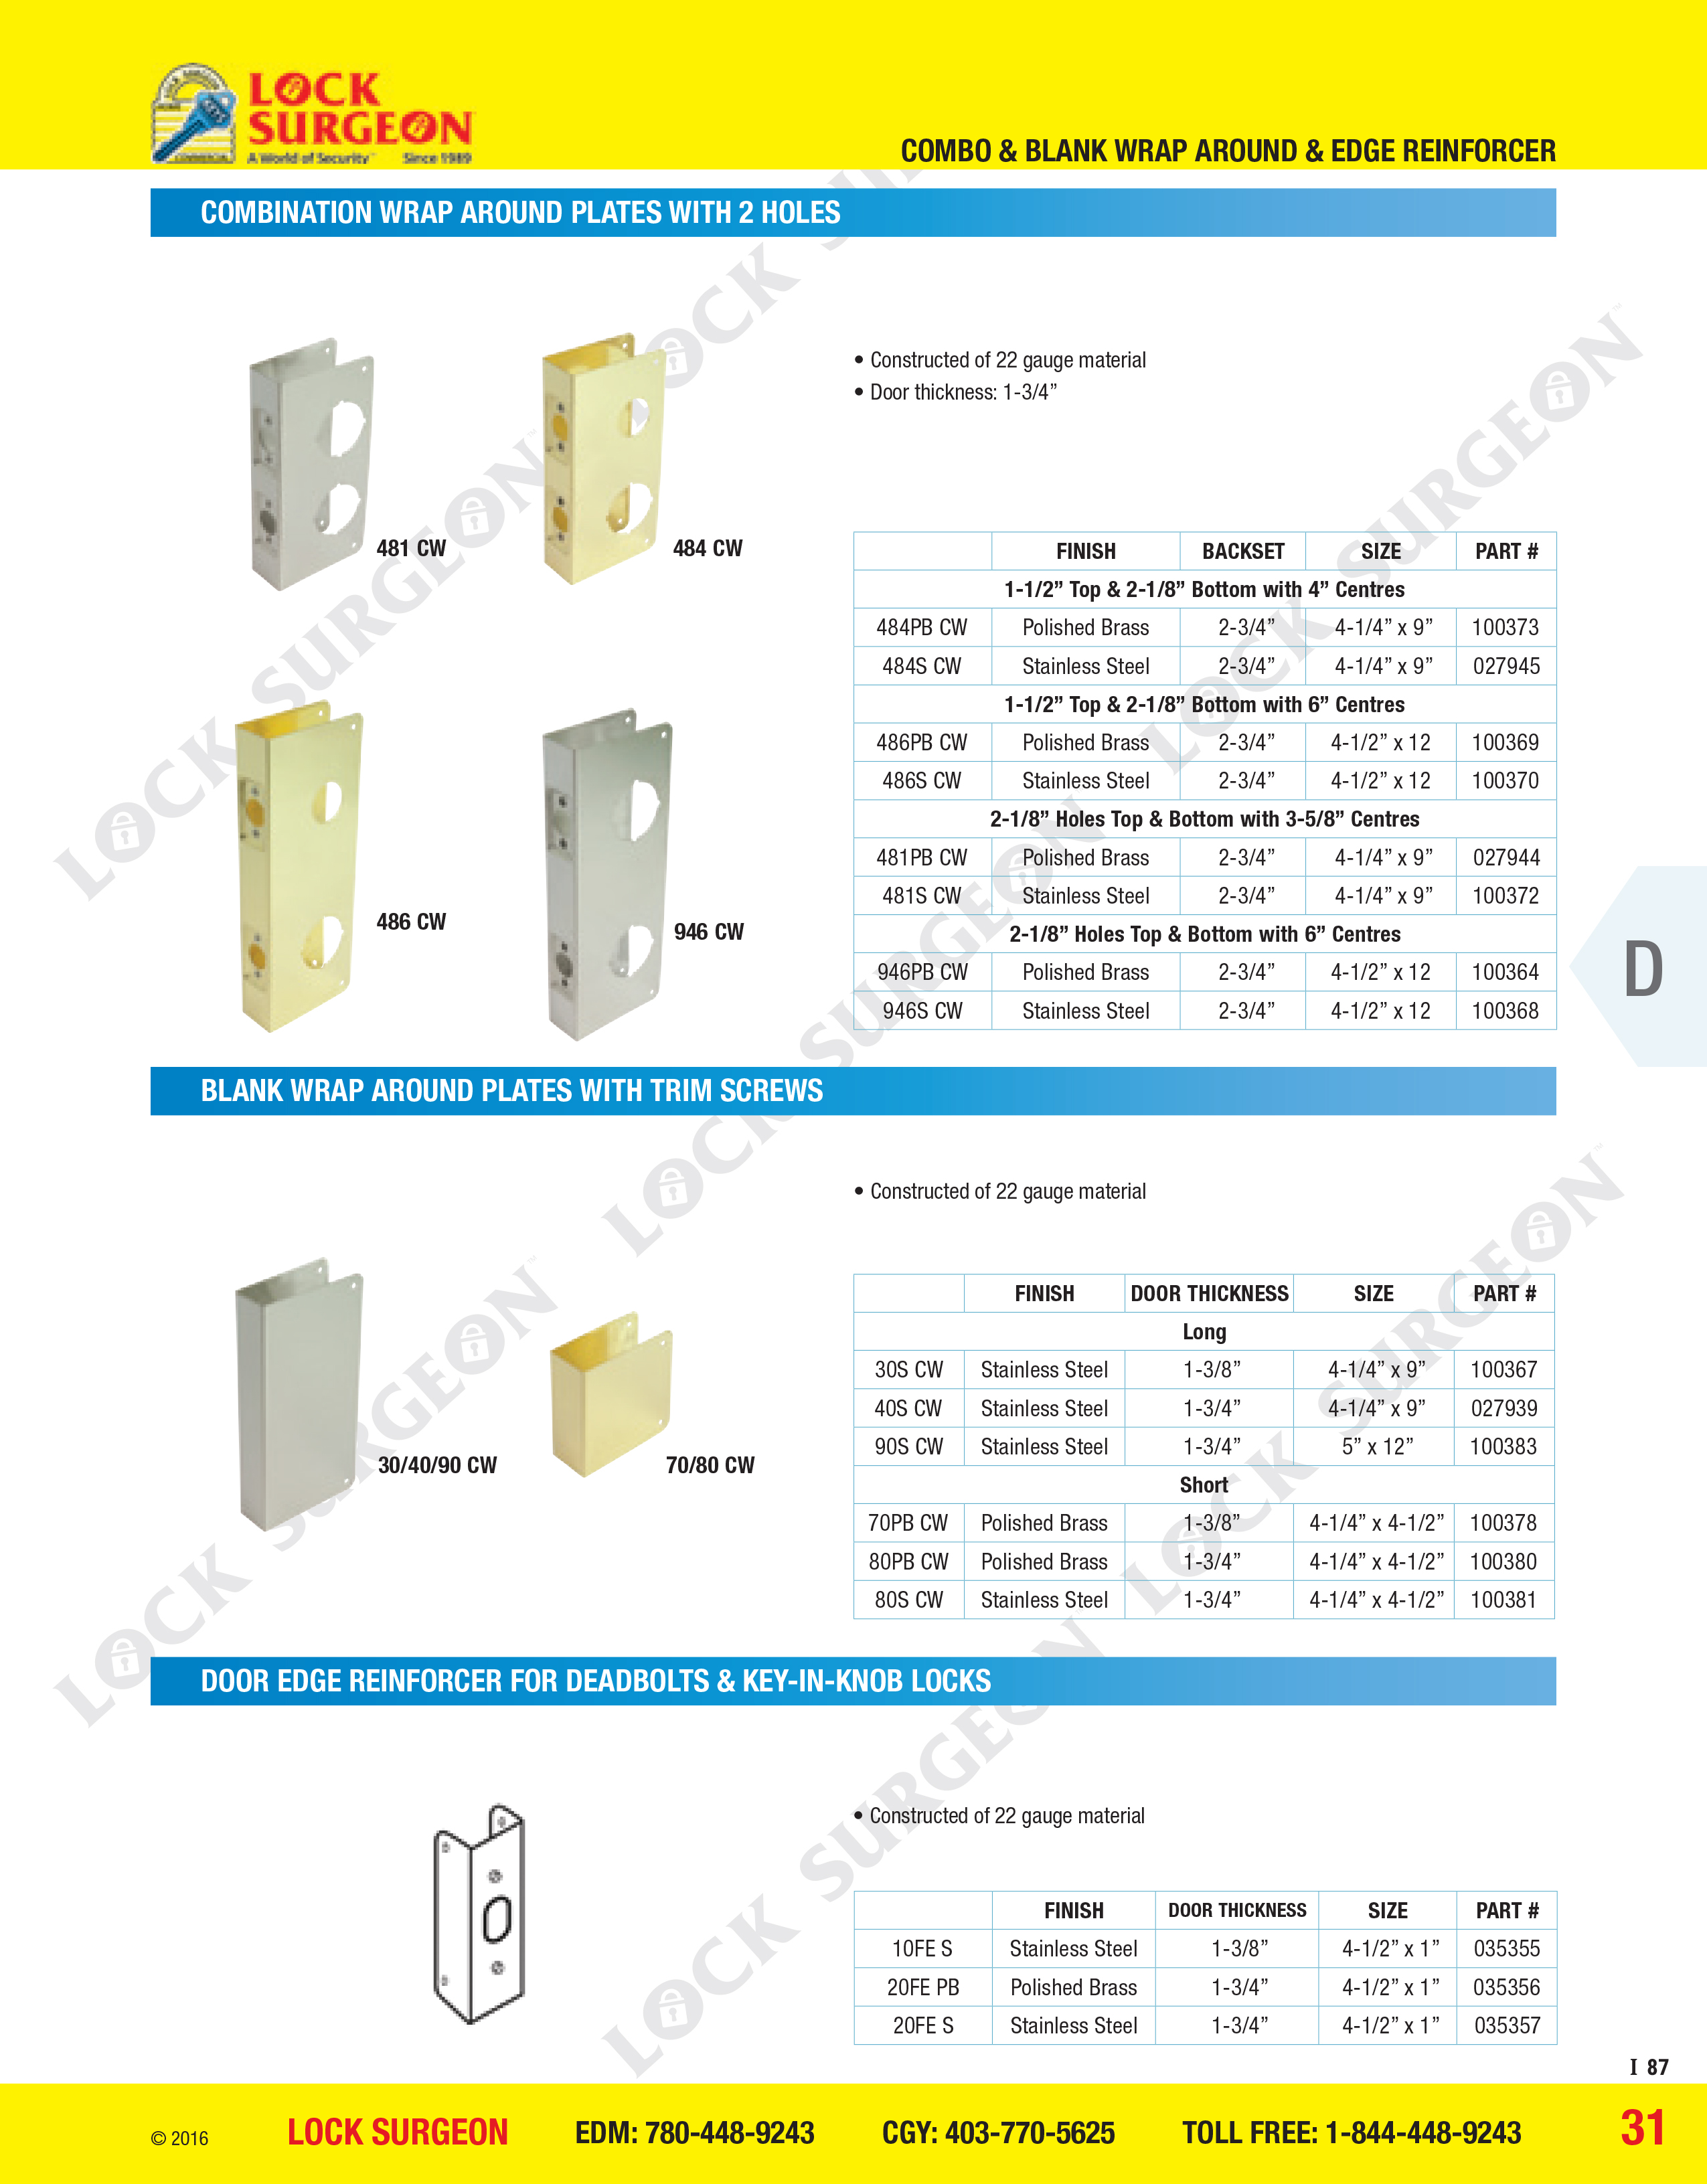 Combination wrap around plates with 2 Holes, Door edge reinforcer for deadbolts Key-in-knob locks.